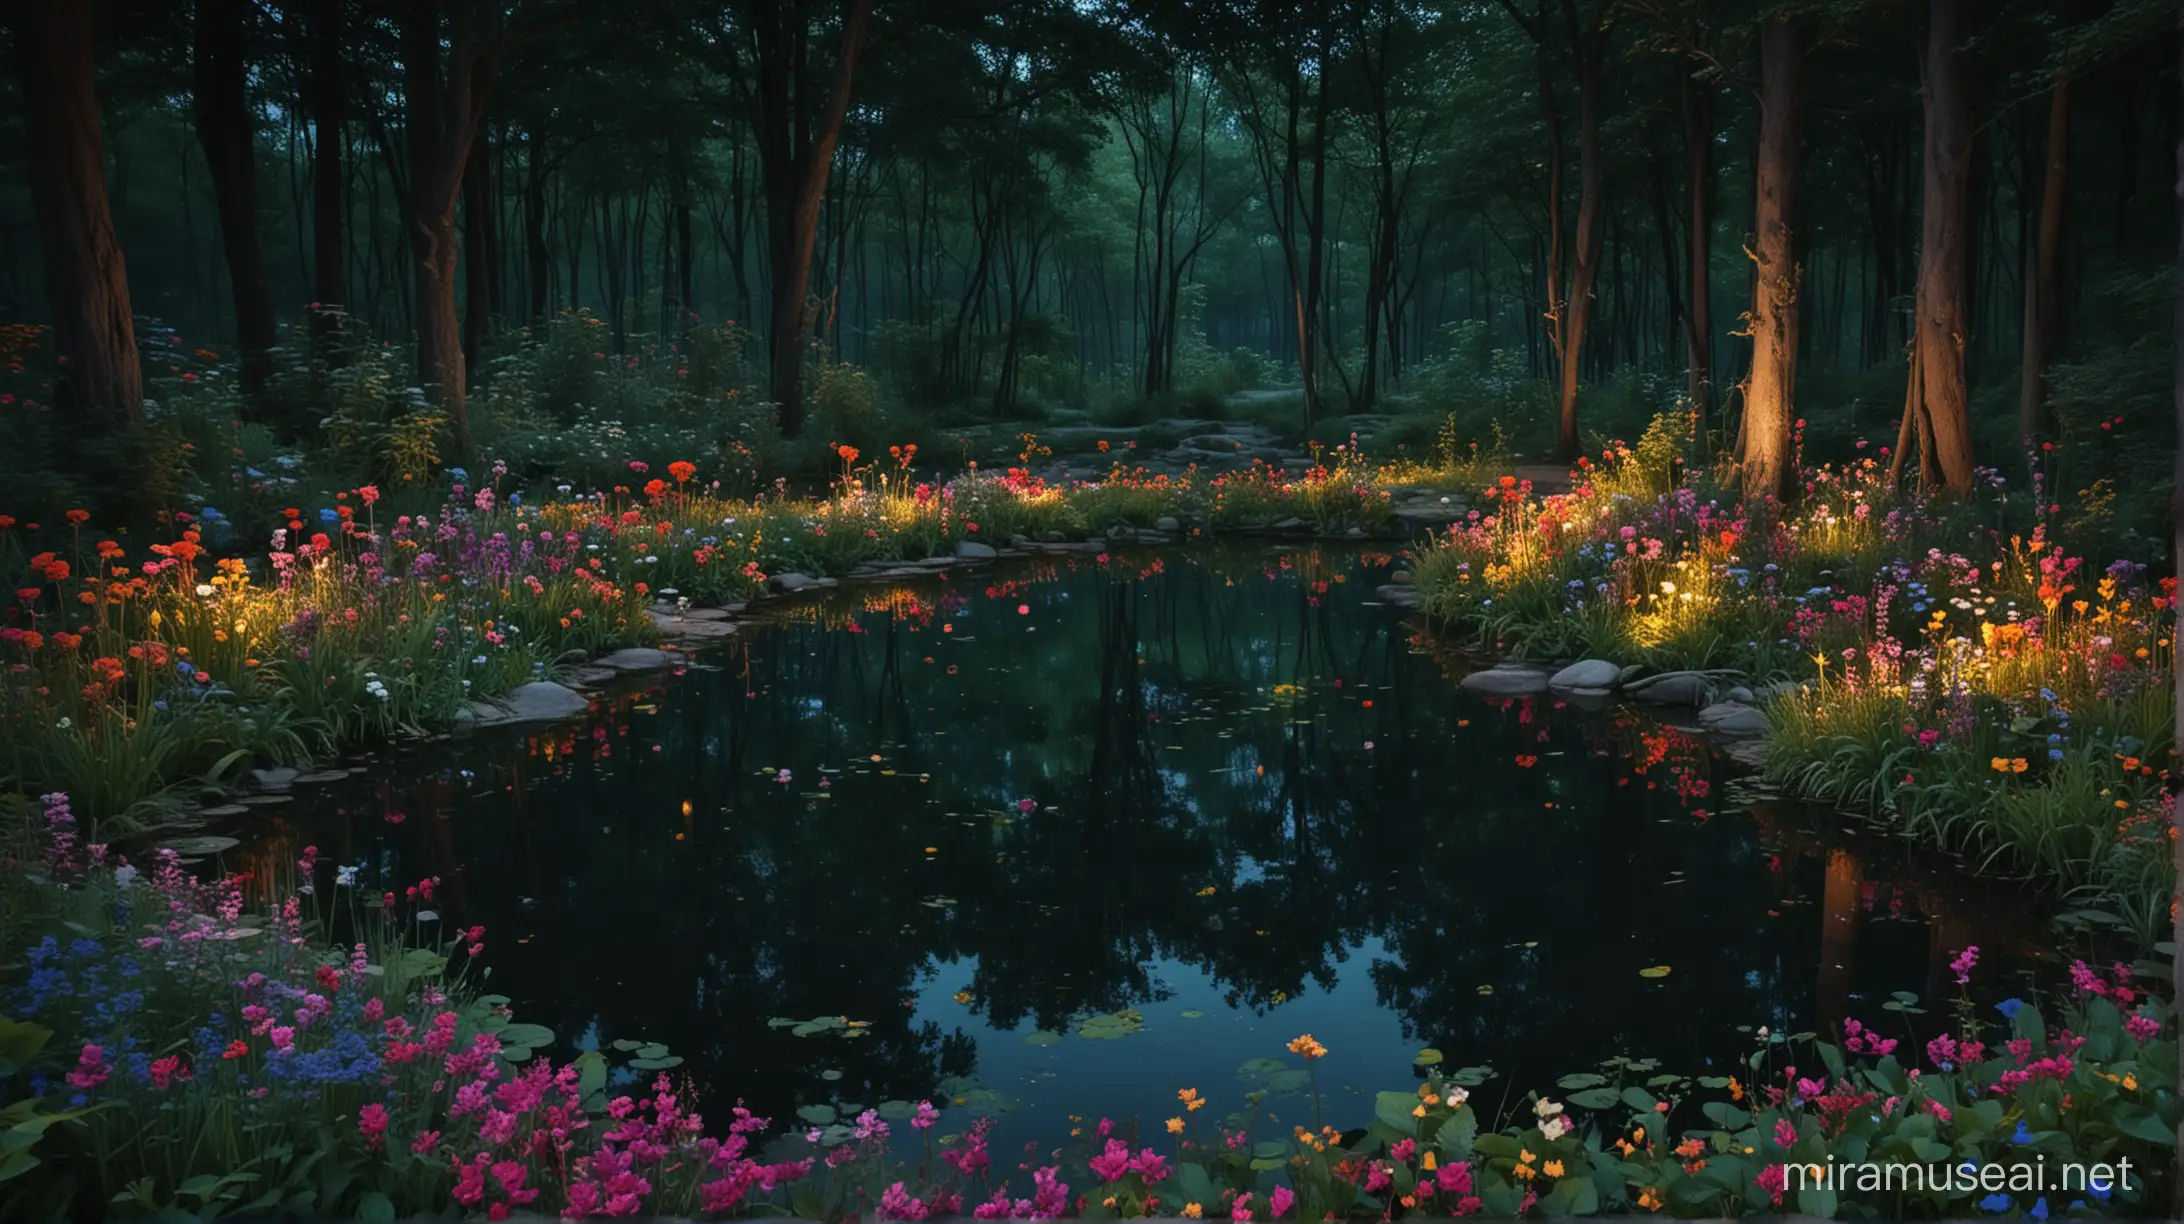 Enchanted Forest Pond at Night with Old Trees and Colorful Flowers